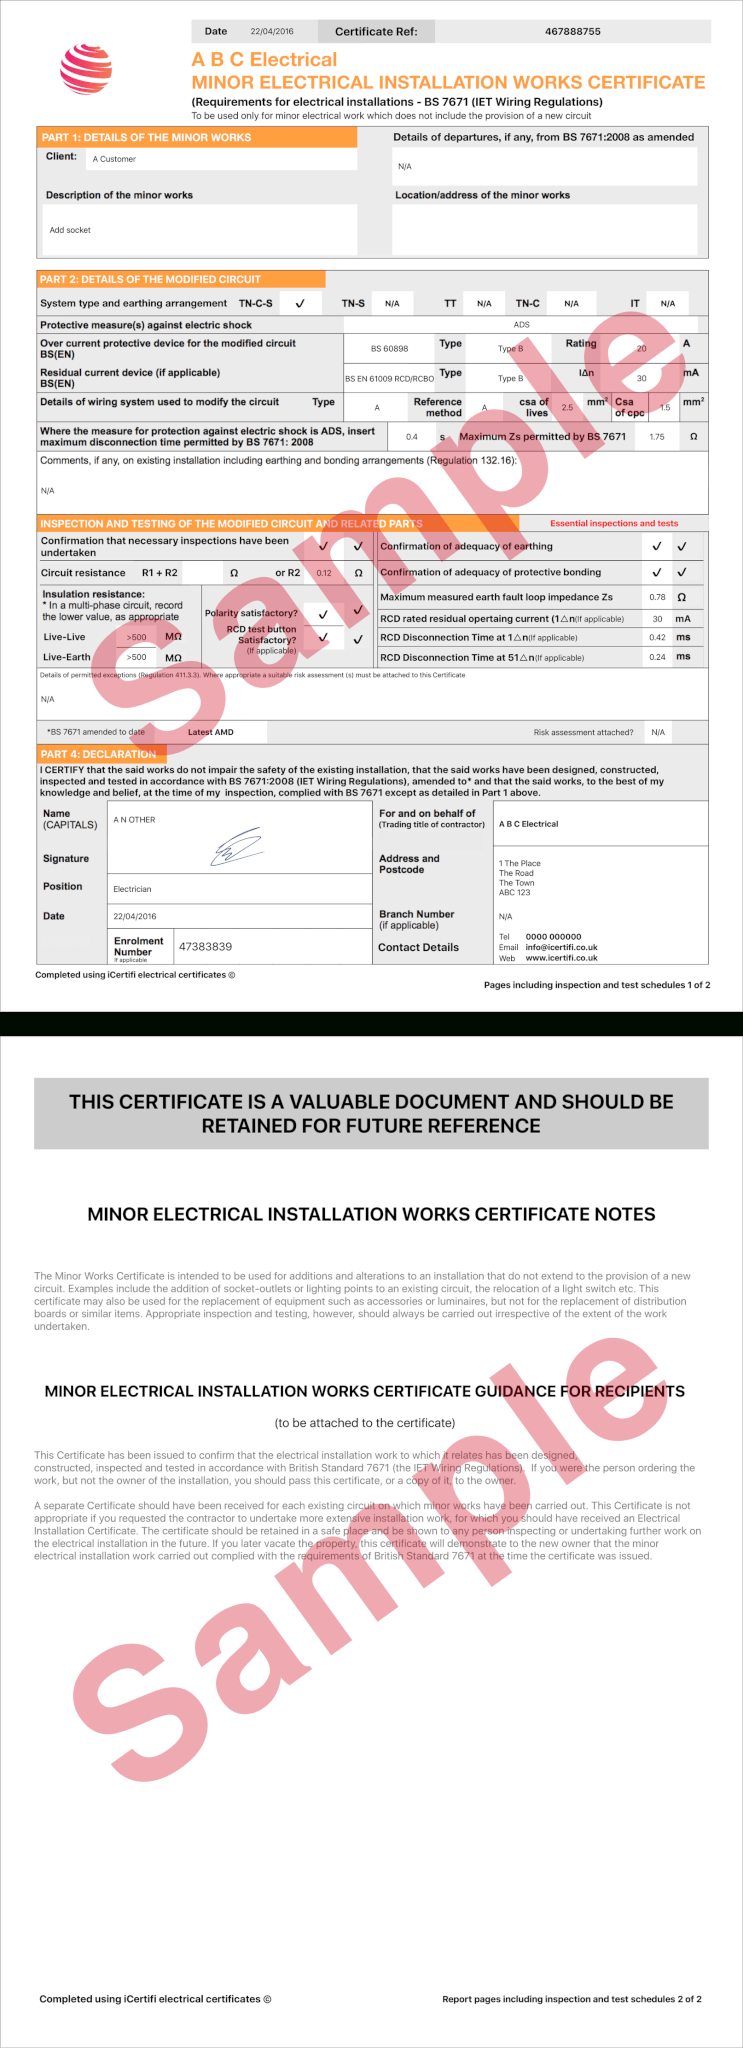 Electrical Certificate – Example Minor Works Certificate For Minor Electrical Installation Works Certificate Template